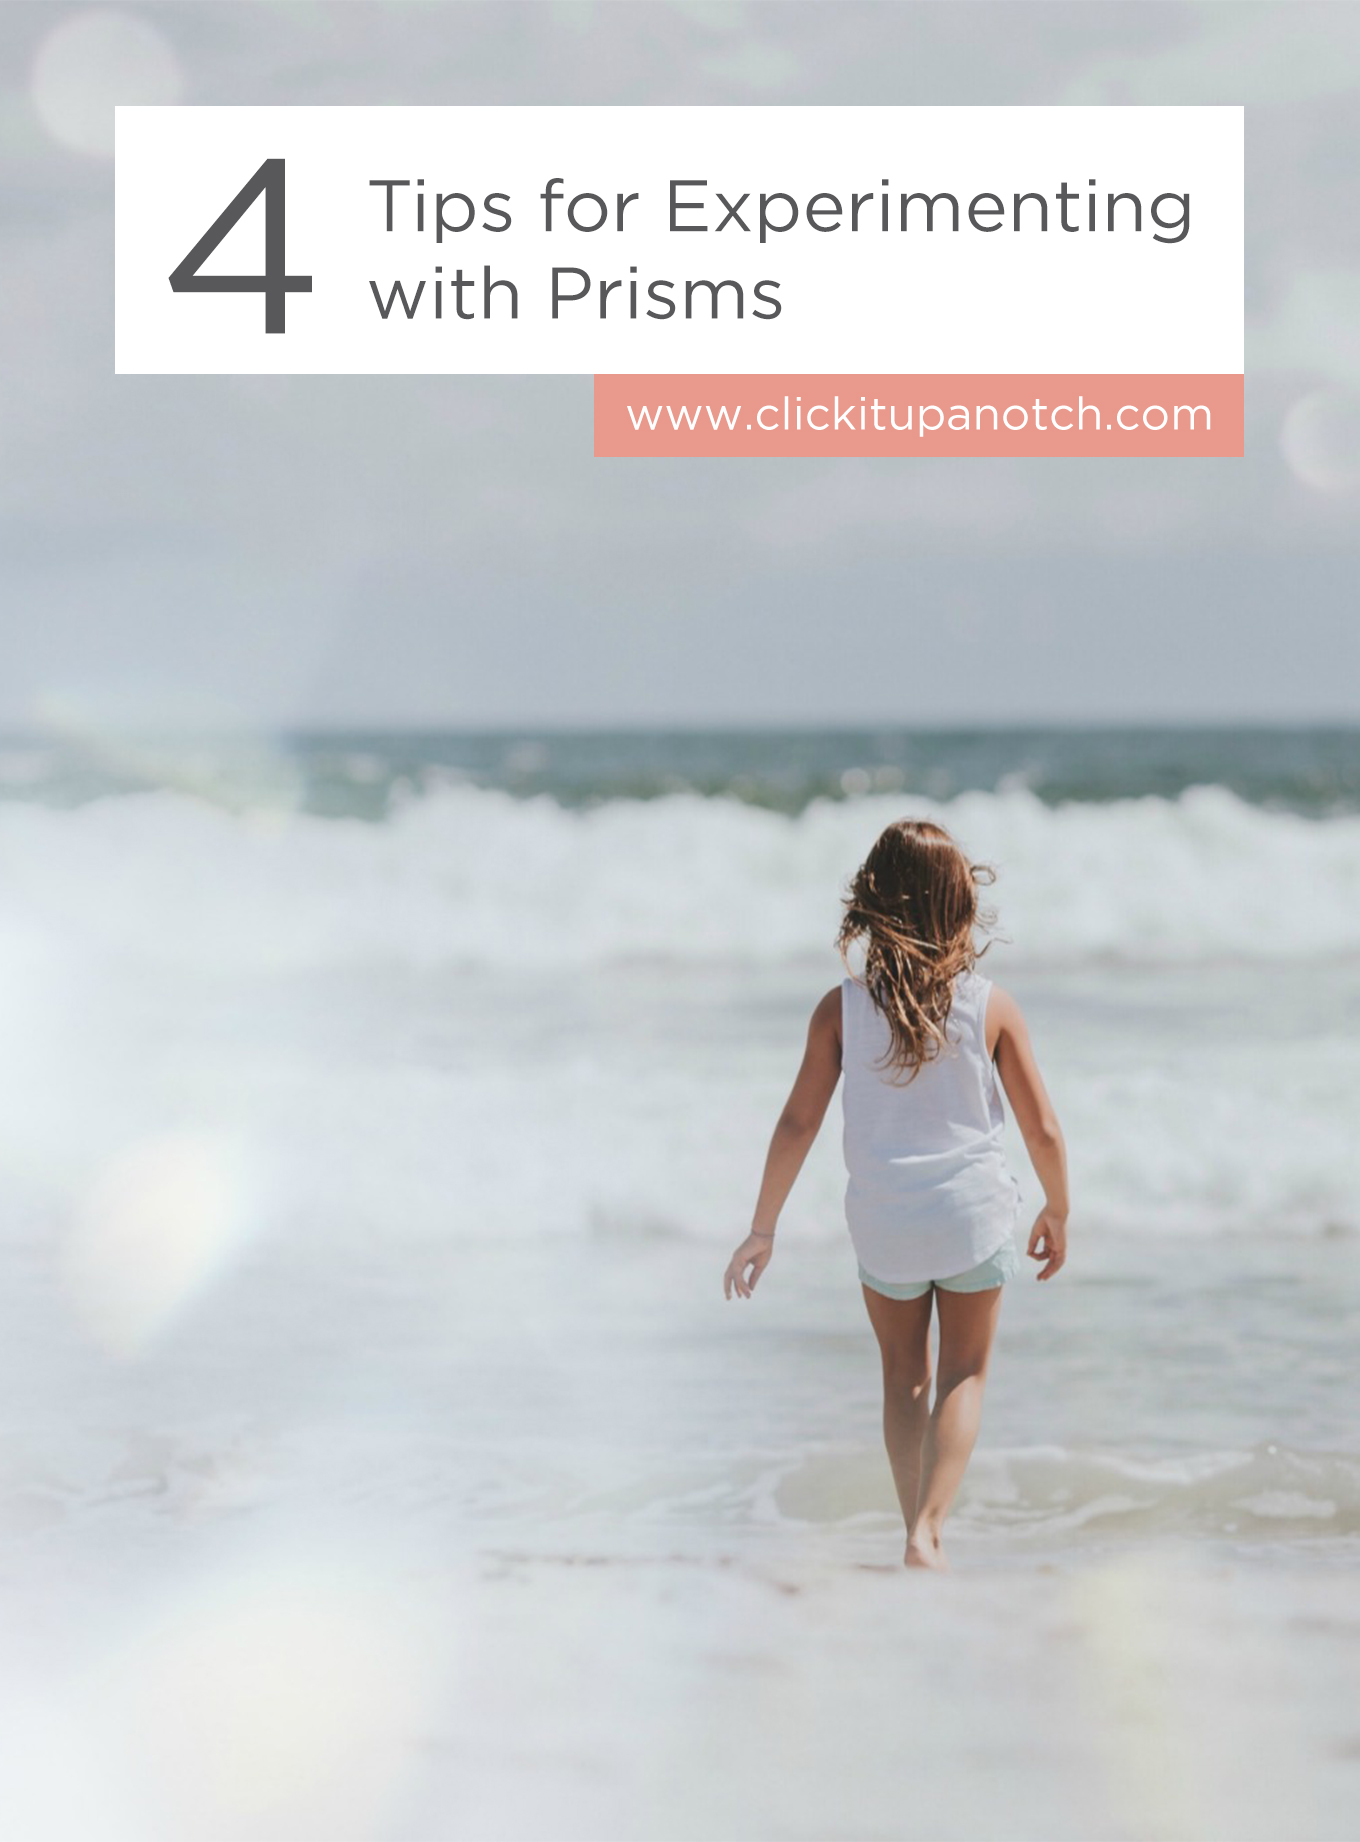 Incorporating prisms into your photography looks like so much fun! What a great way to spark creativity! Read - "4 Tips for Experimenting with Prisms"